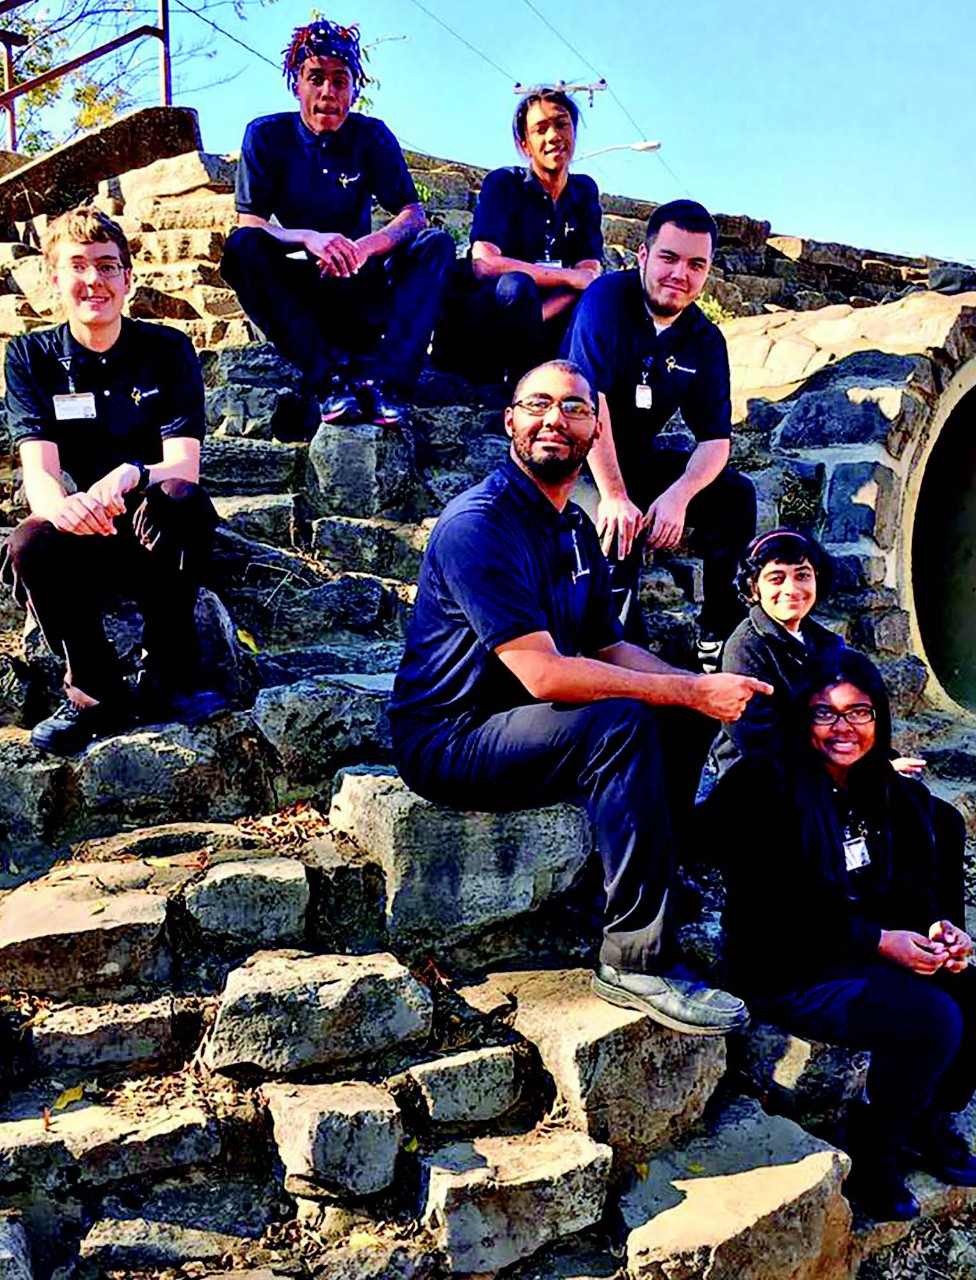 Project SEARCH Vanderbilt Intern Class 2017. This is a diverse group of young people, all in dark blue uniforms. They are posing on a curved stone wall.